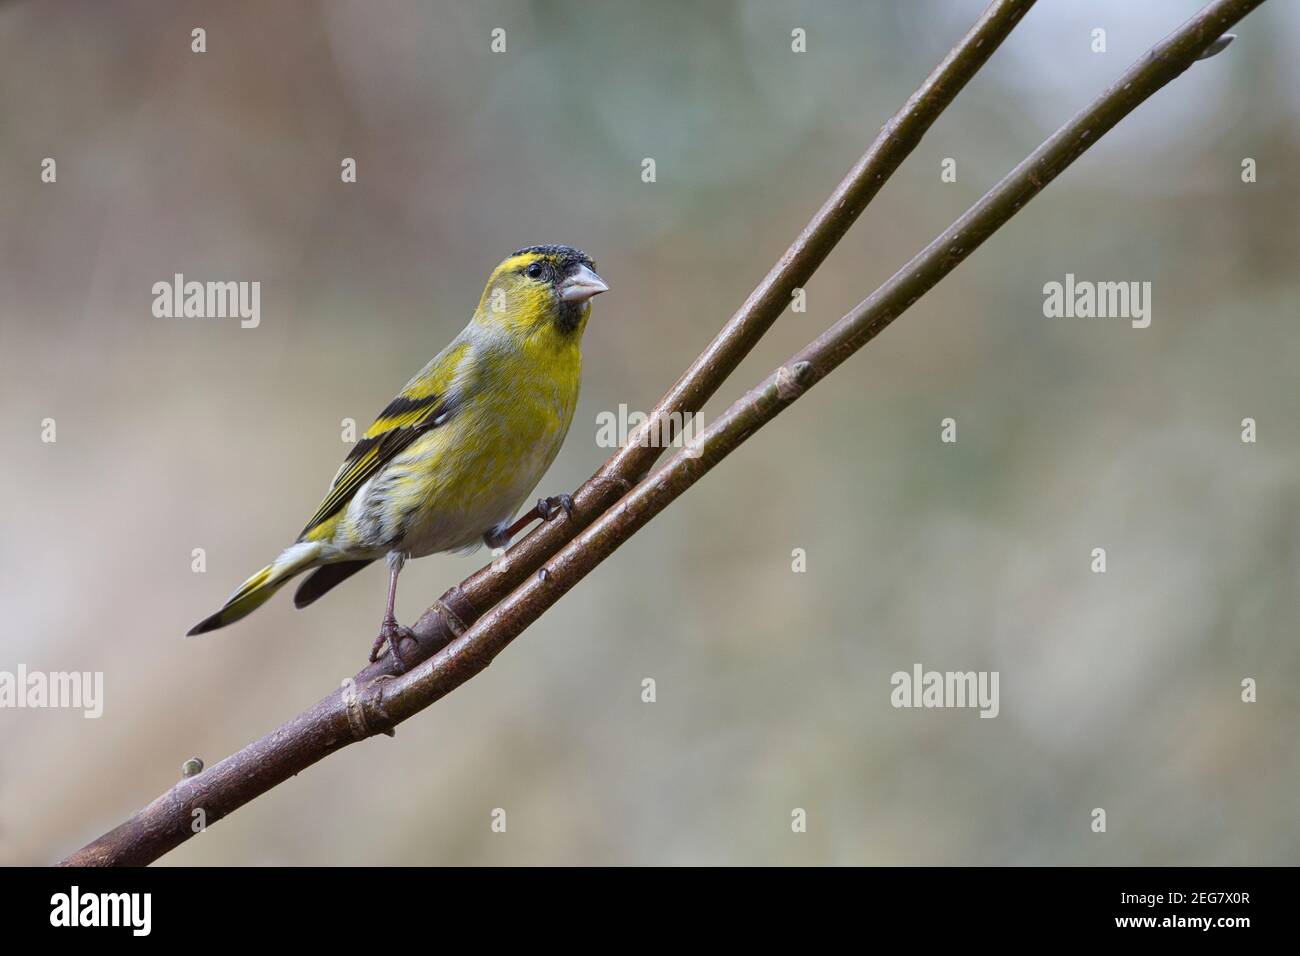 Adult male Eurasian siskin (Carduelis spinus) perched in a tree in a garden Stock Photo